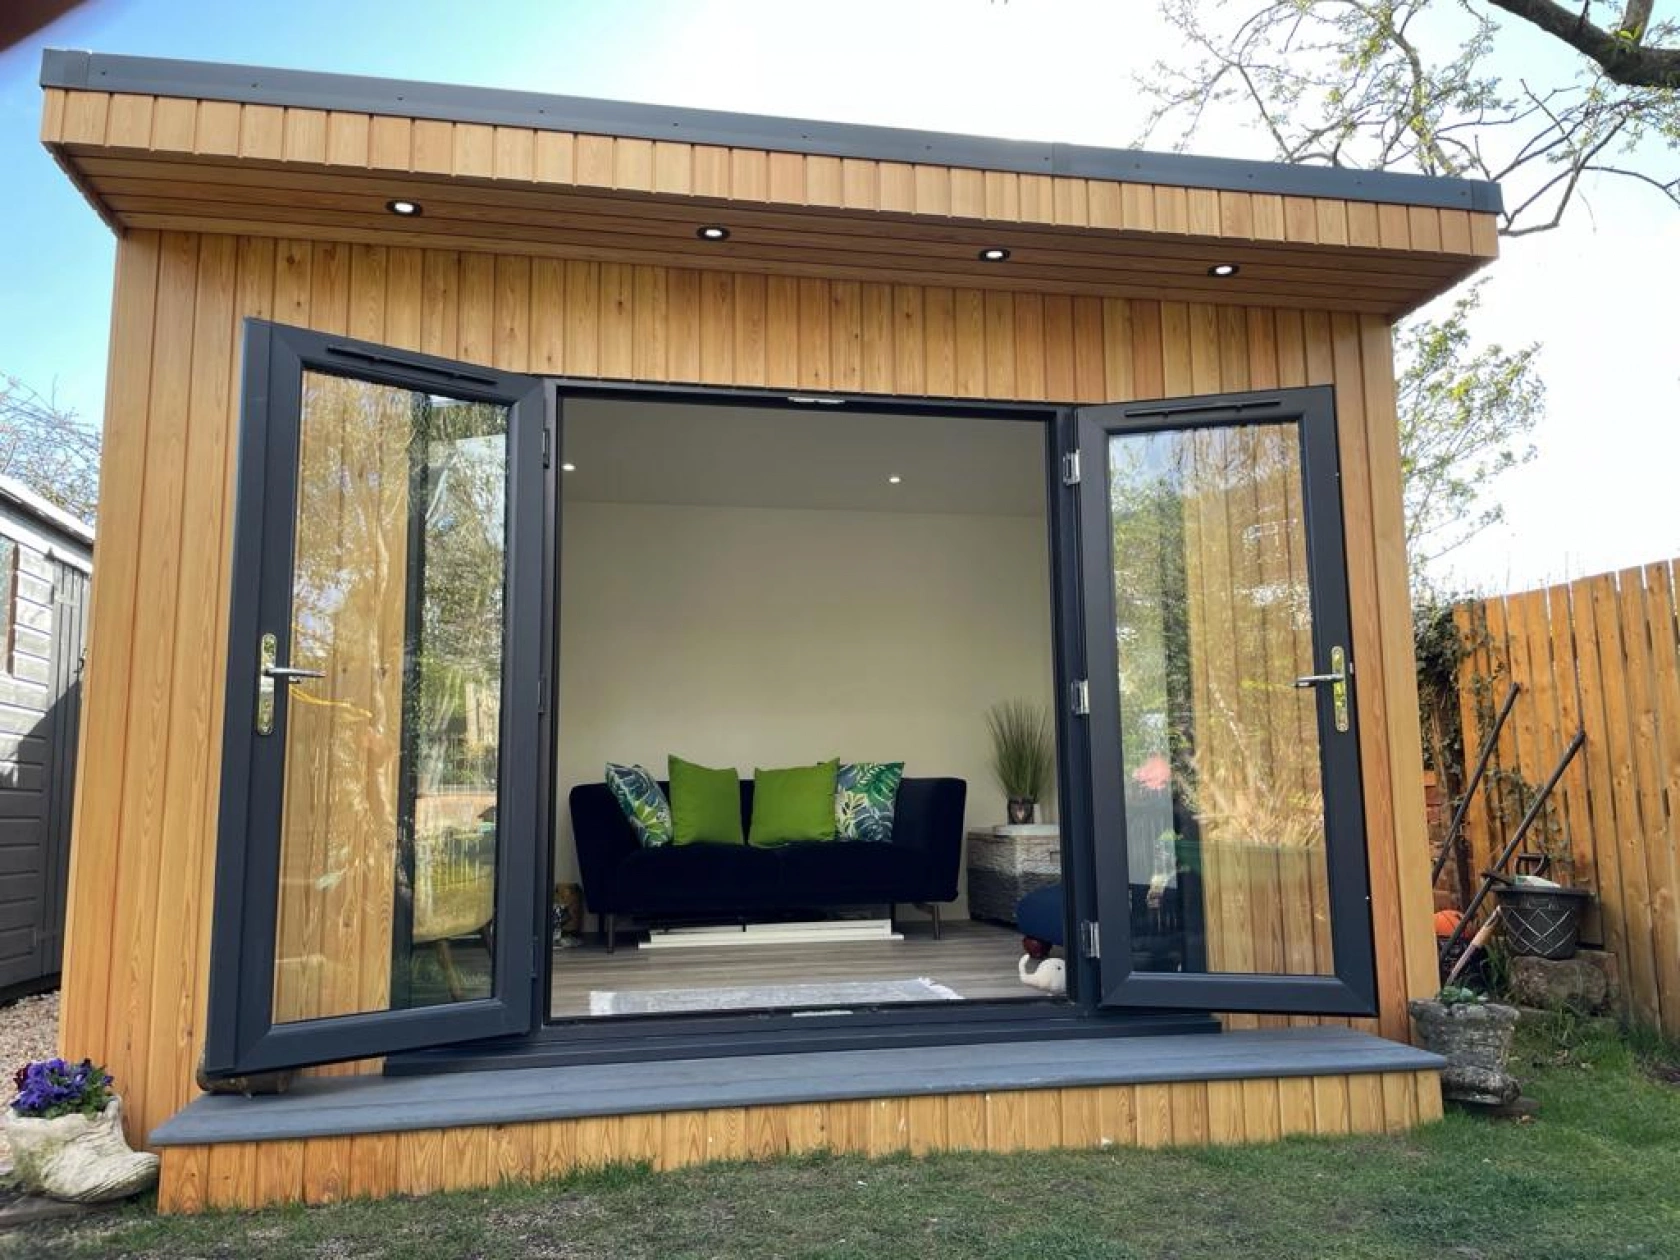 Exploring the Different Uses of Garden Rooms